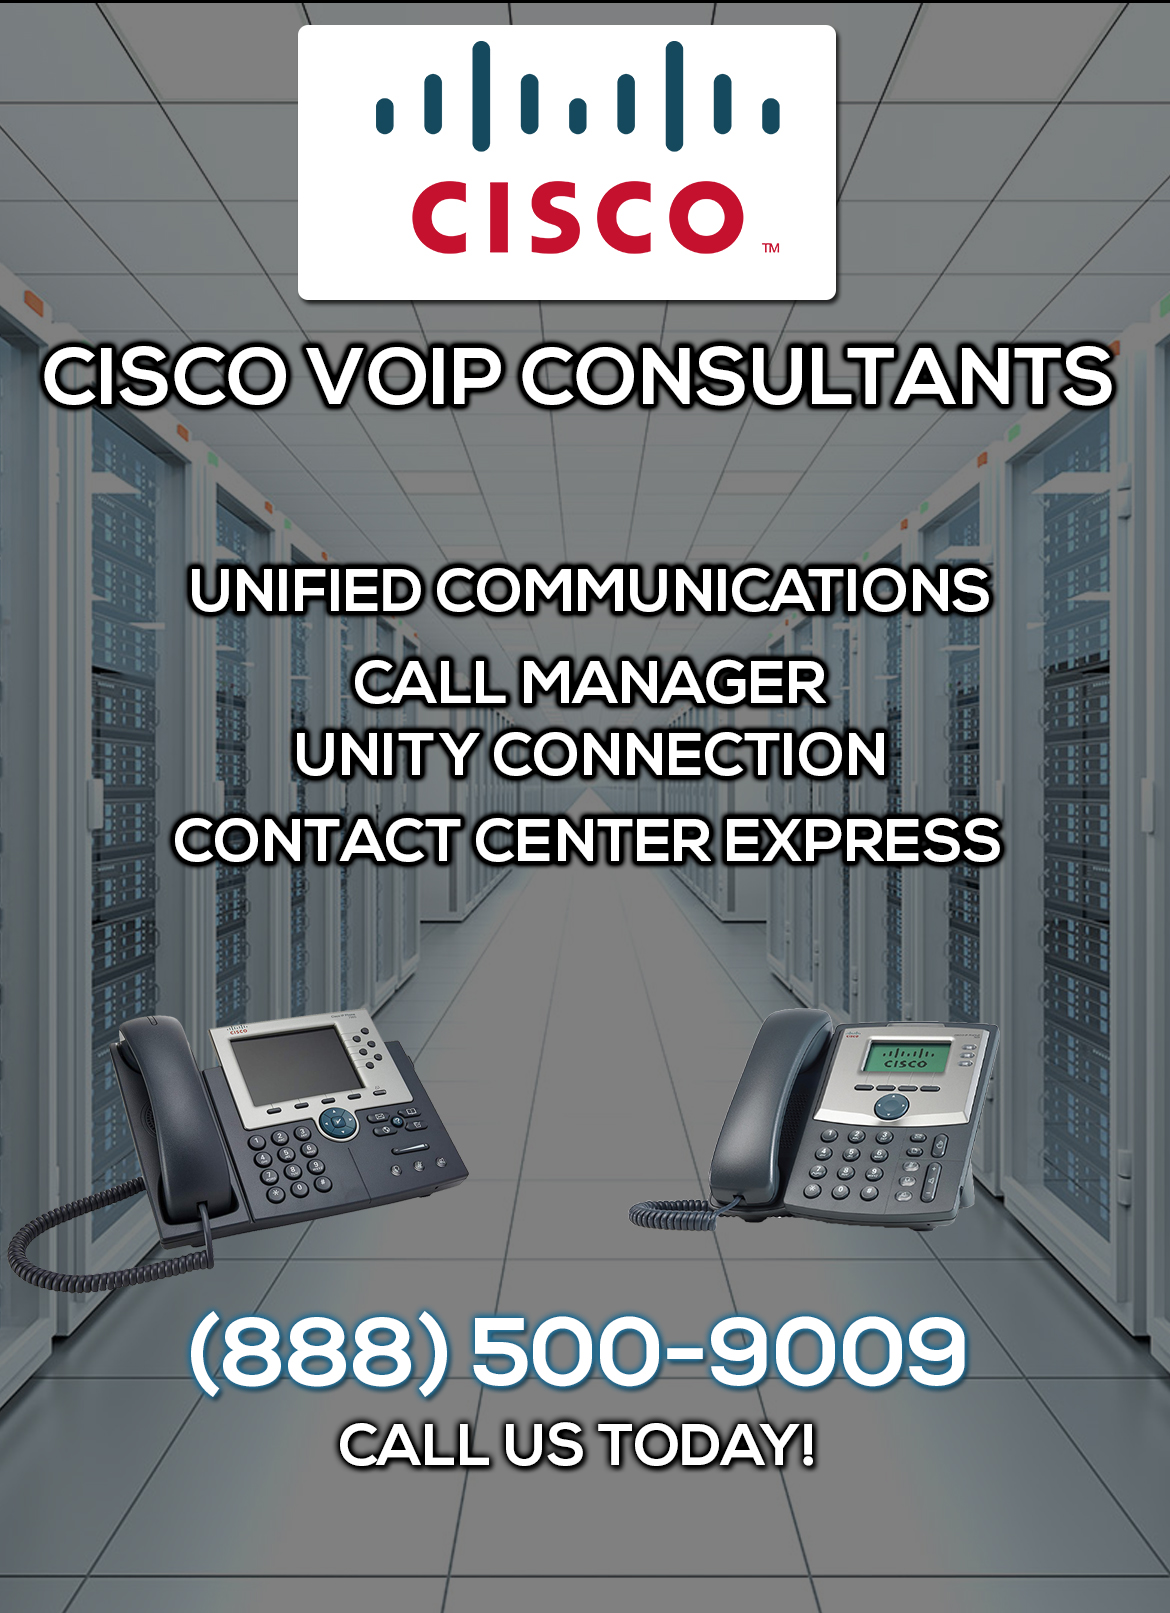 Cisco VoIP Consultants Westminster